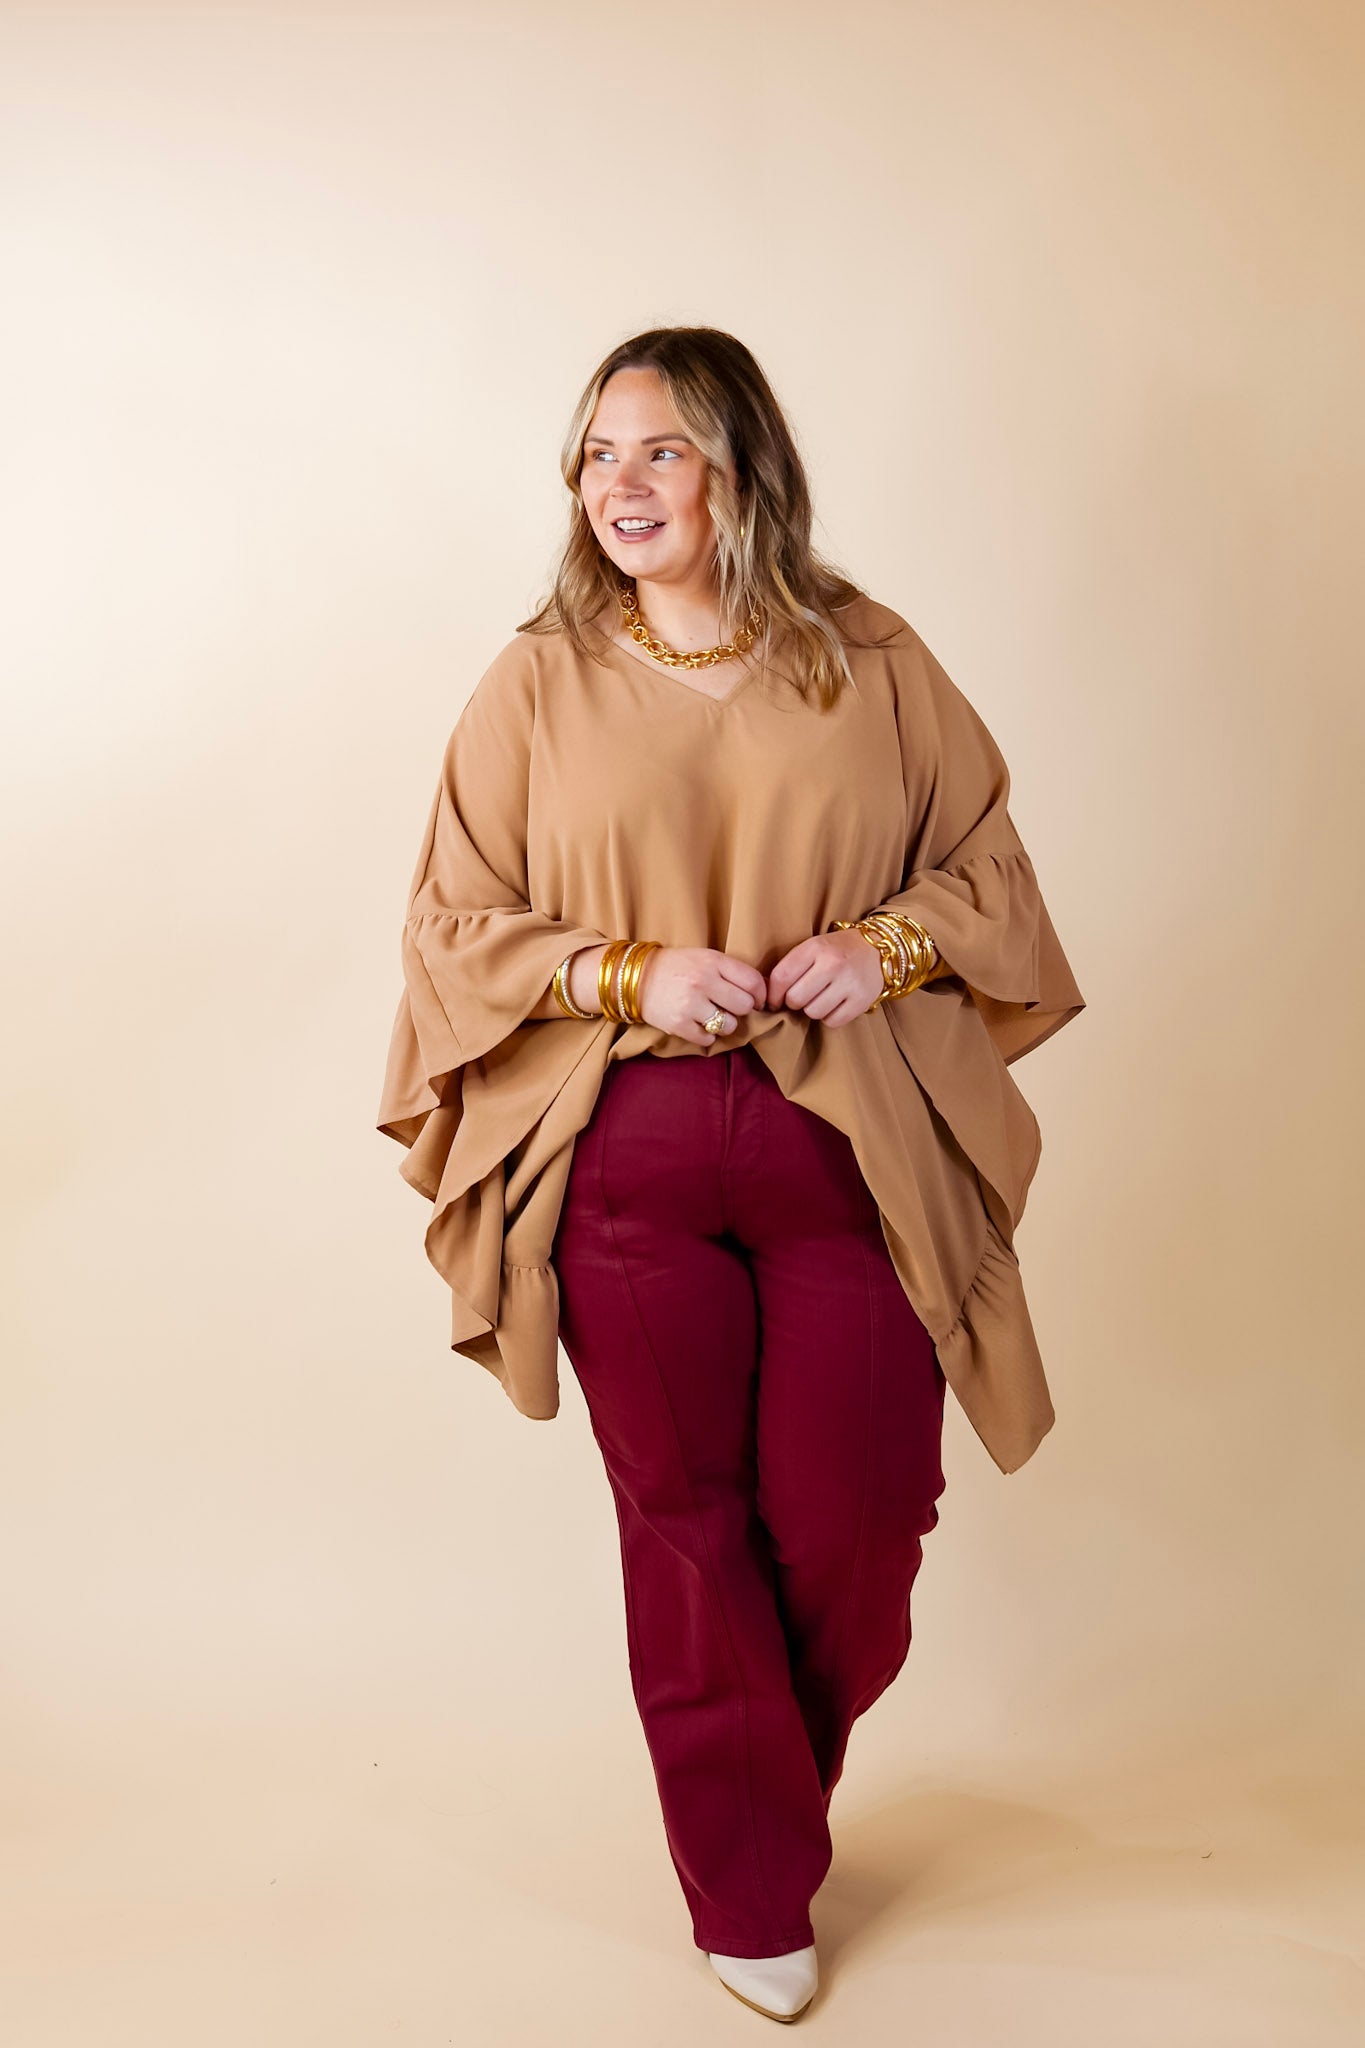 Secret Strength Ruffle Detail Poncho Top in Mocha Brown - Giddy Up Glamour Boutique